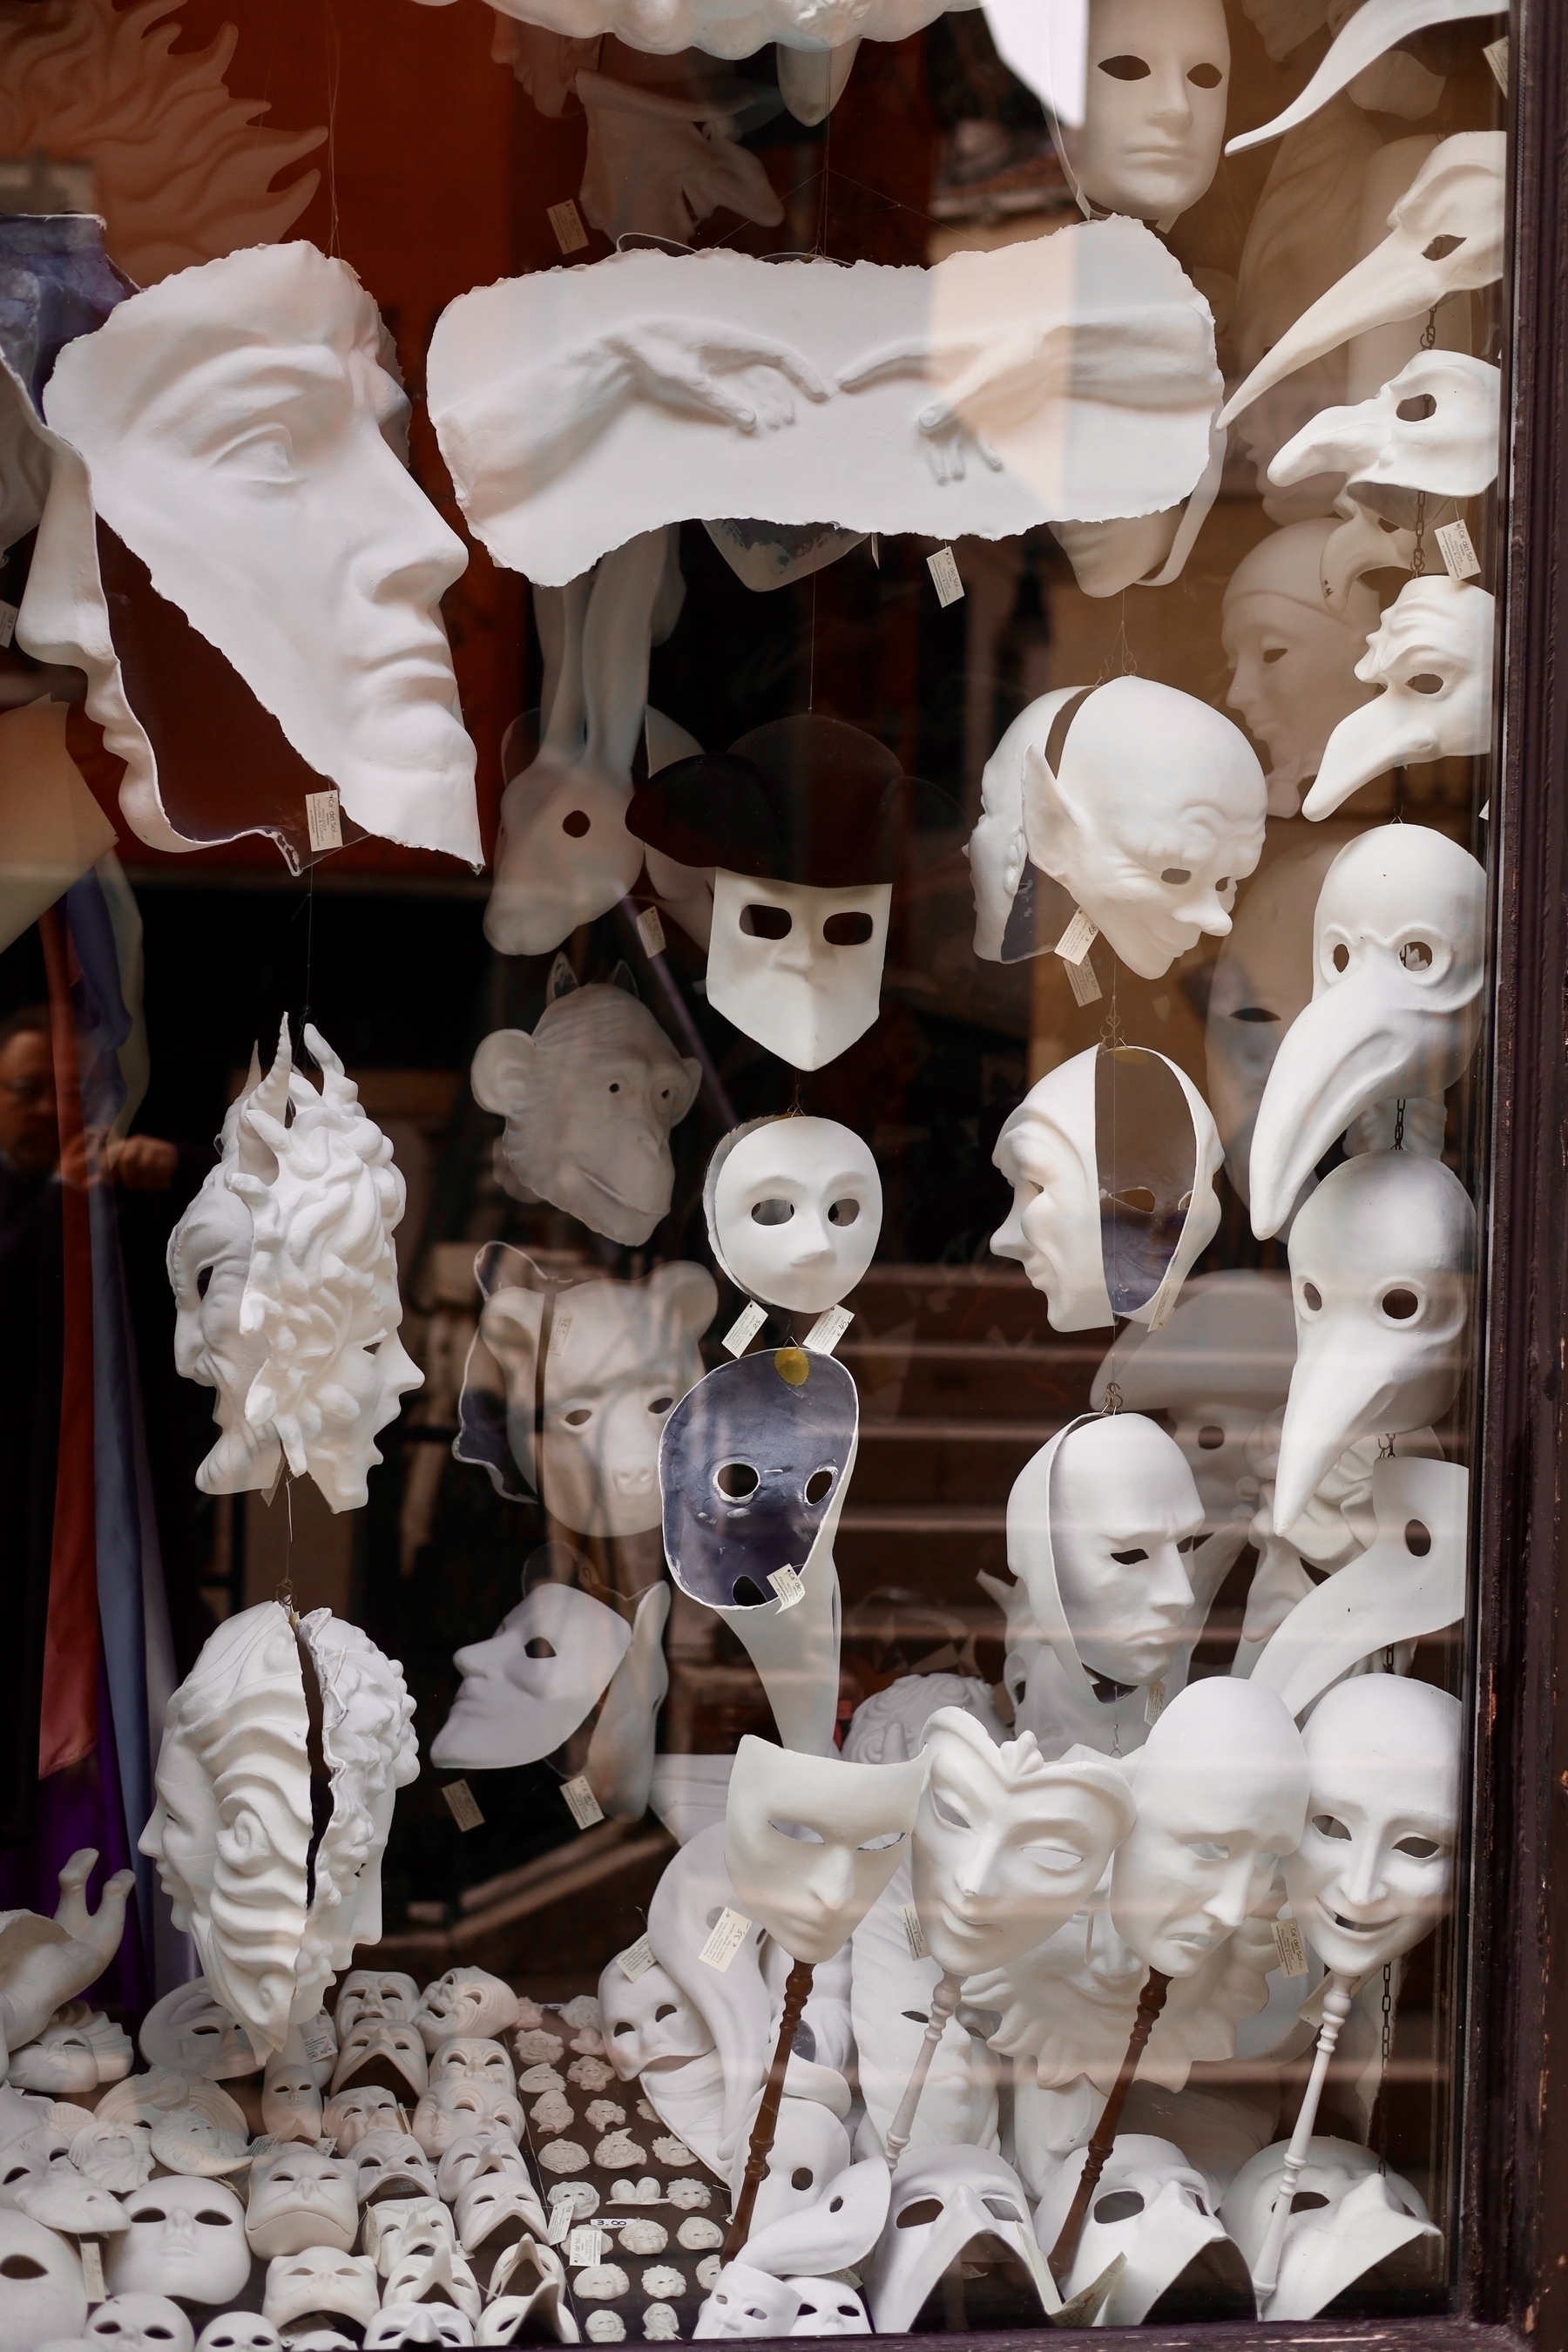 A display window is filled with various white theatrical and carnival masks of different shapes and sizes.